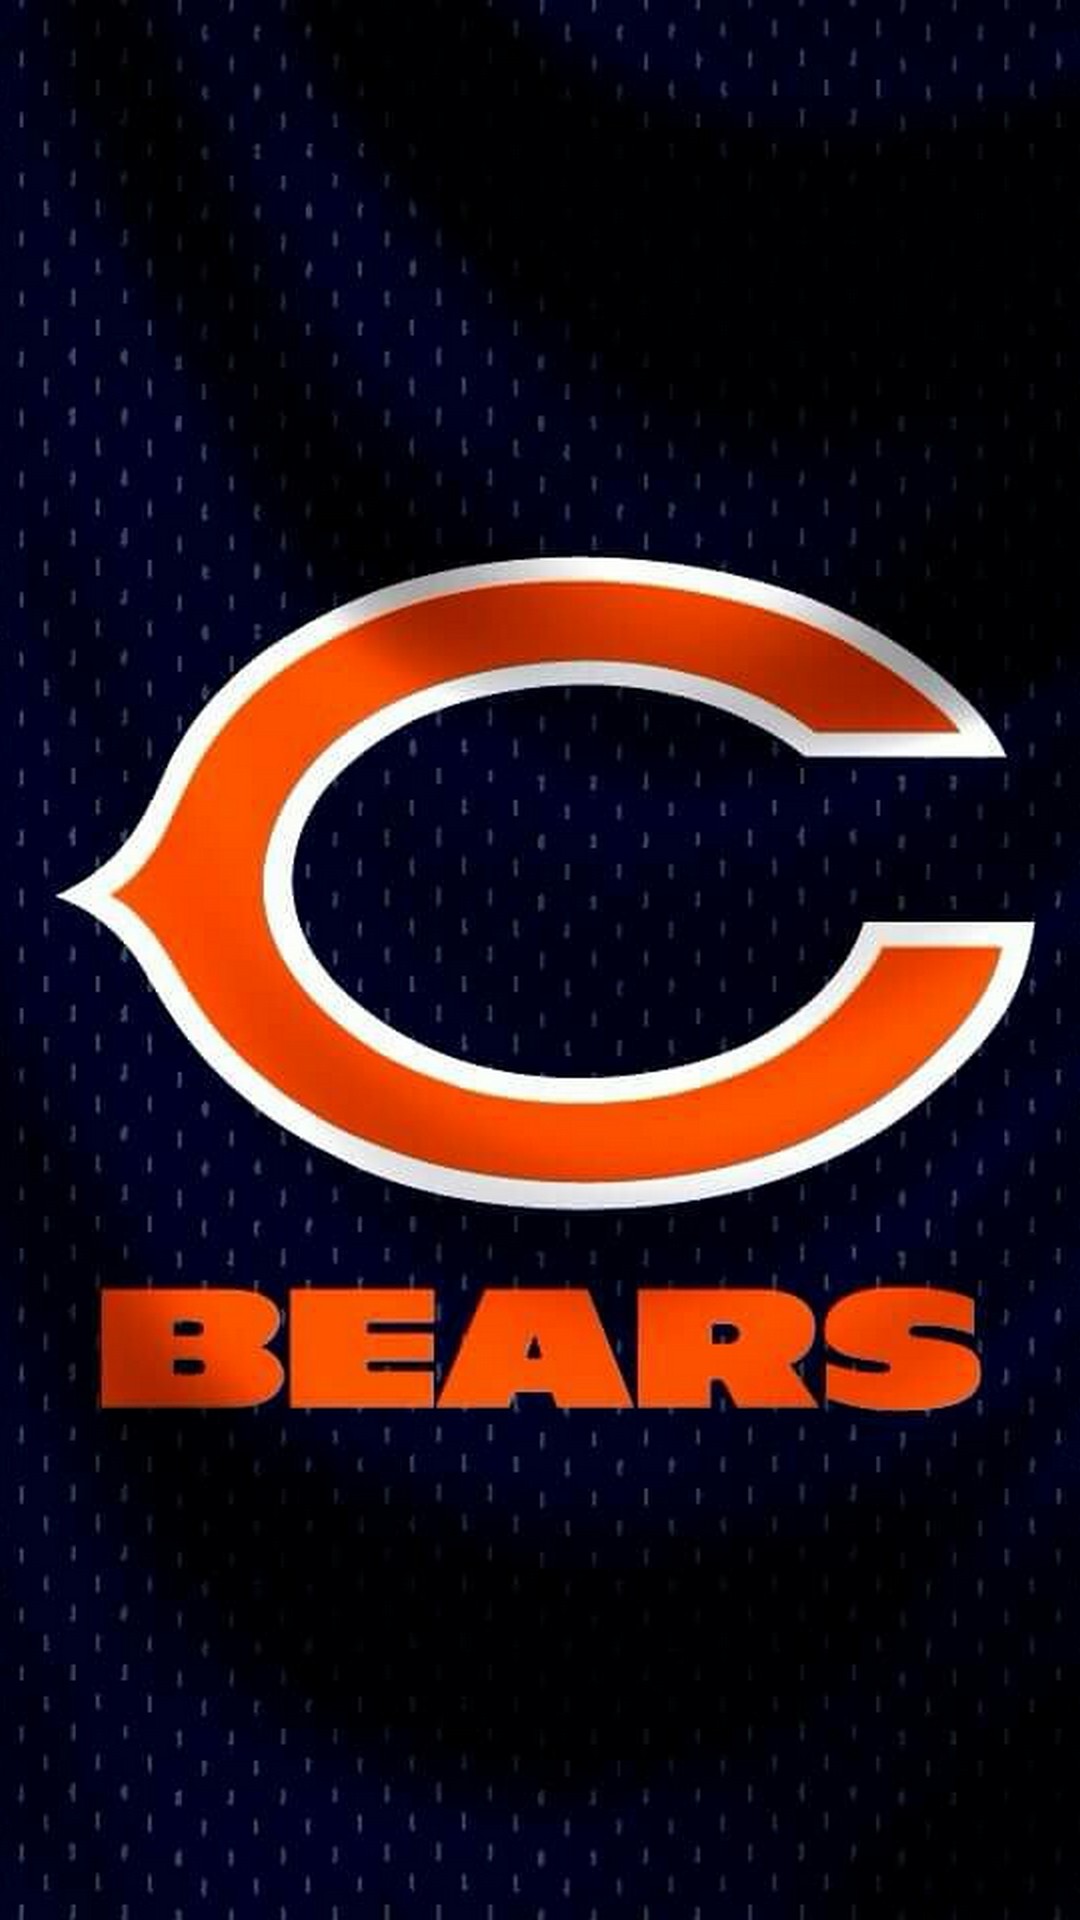 Chicago Bears iPhone 8 Wallpaper - NFL Backgrounds